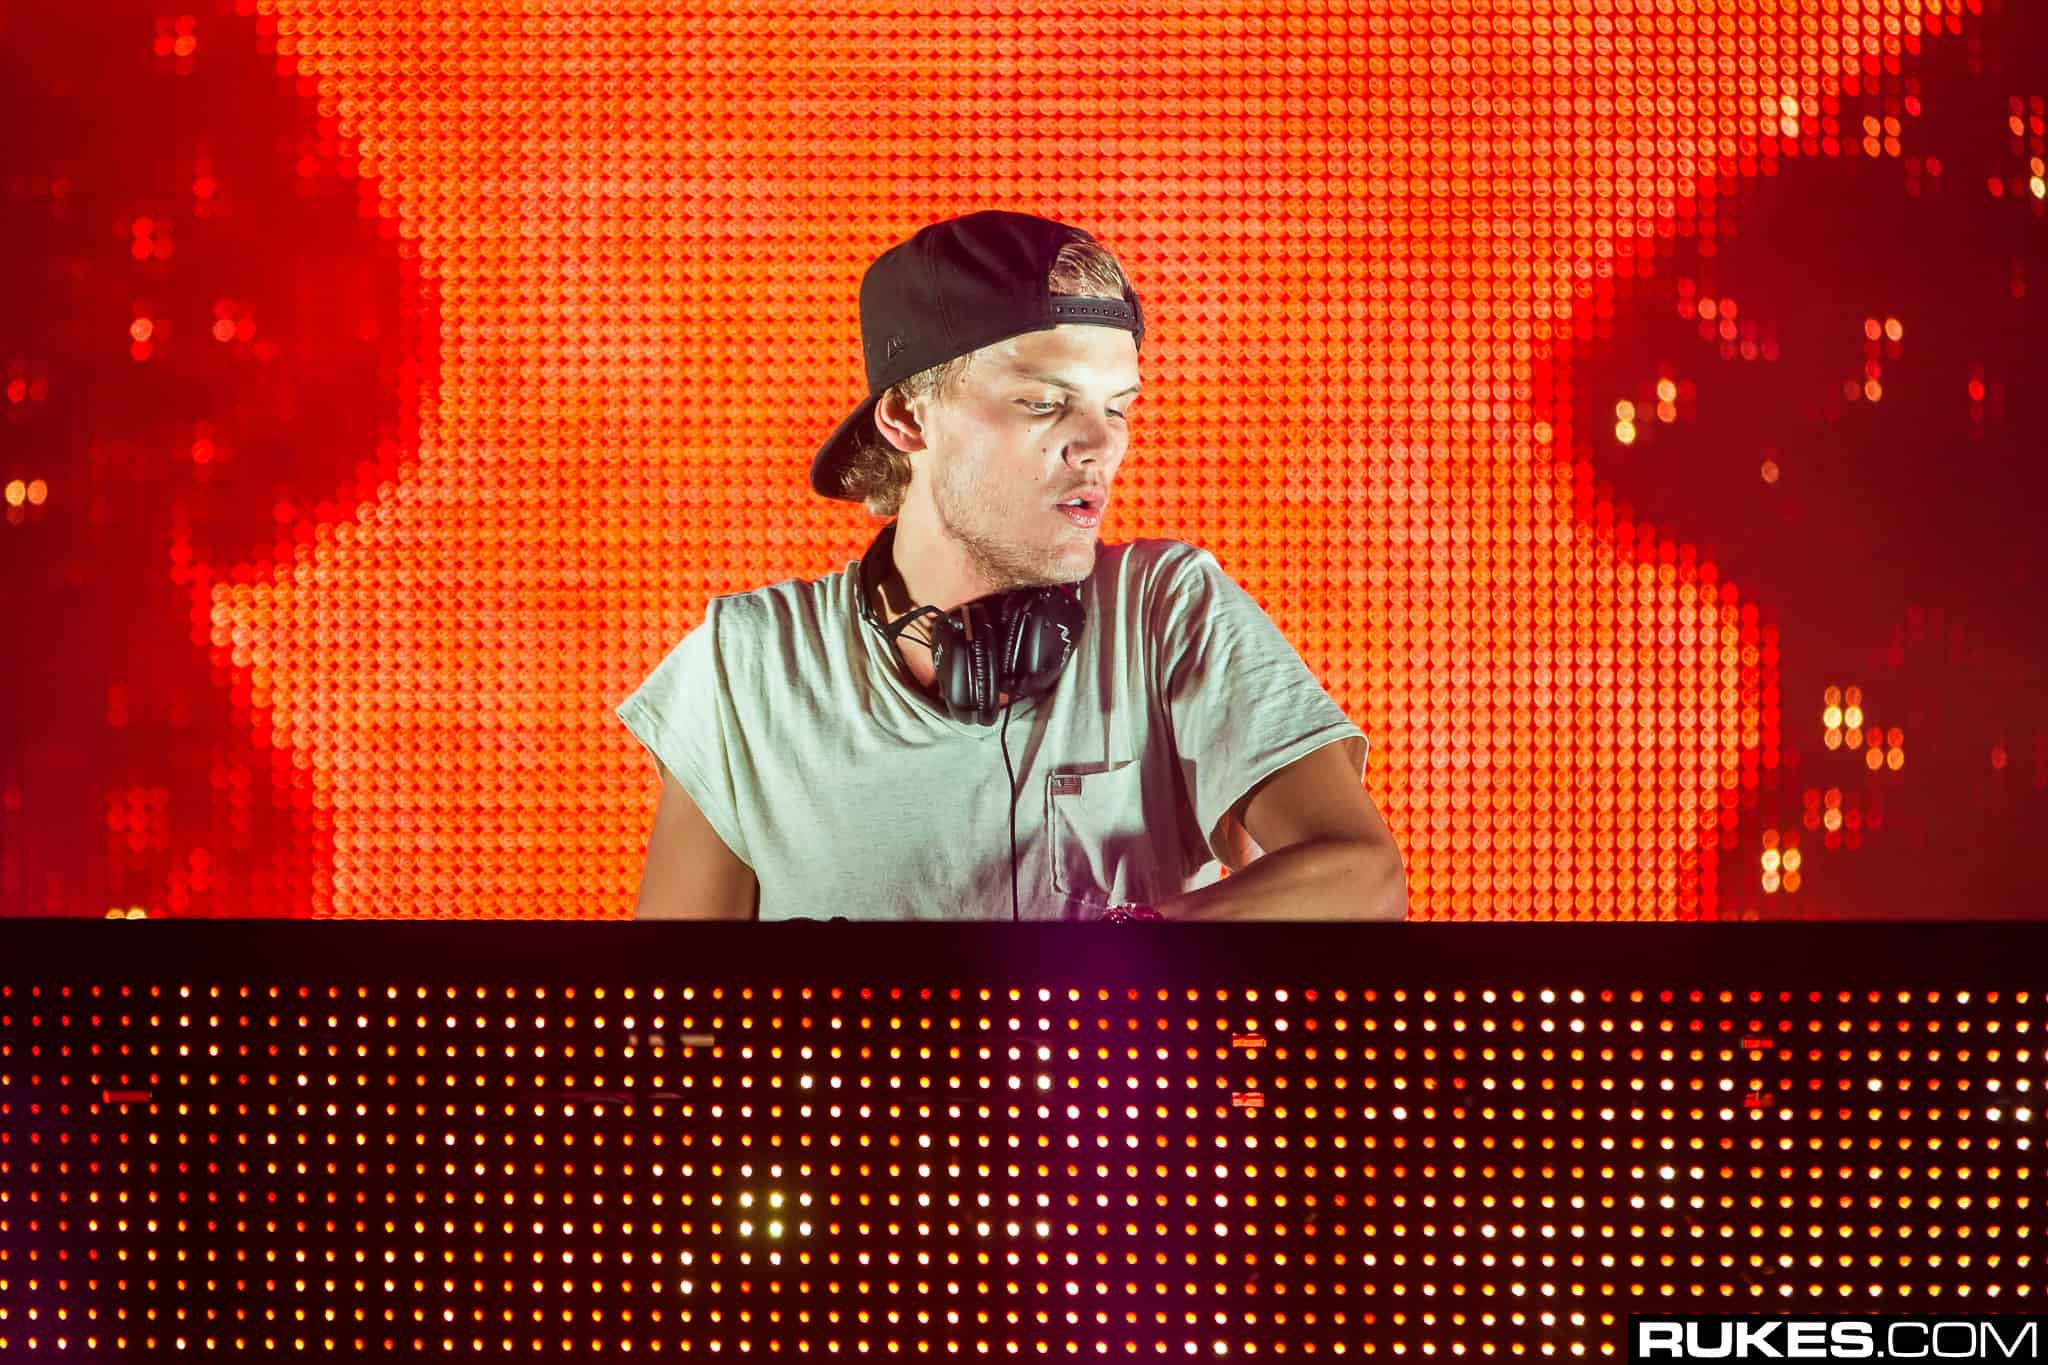 Avicii anthem ‘Without You’ was released 5 years ago